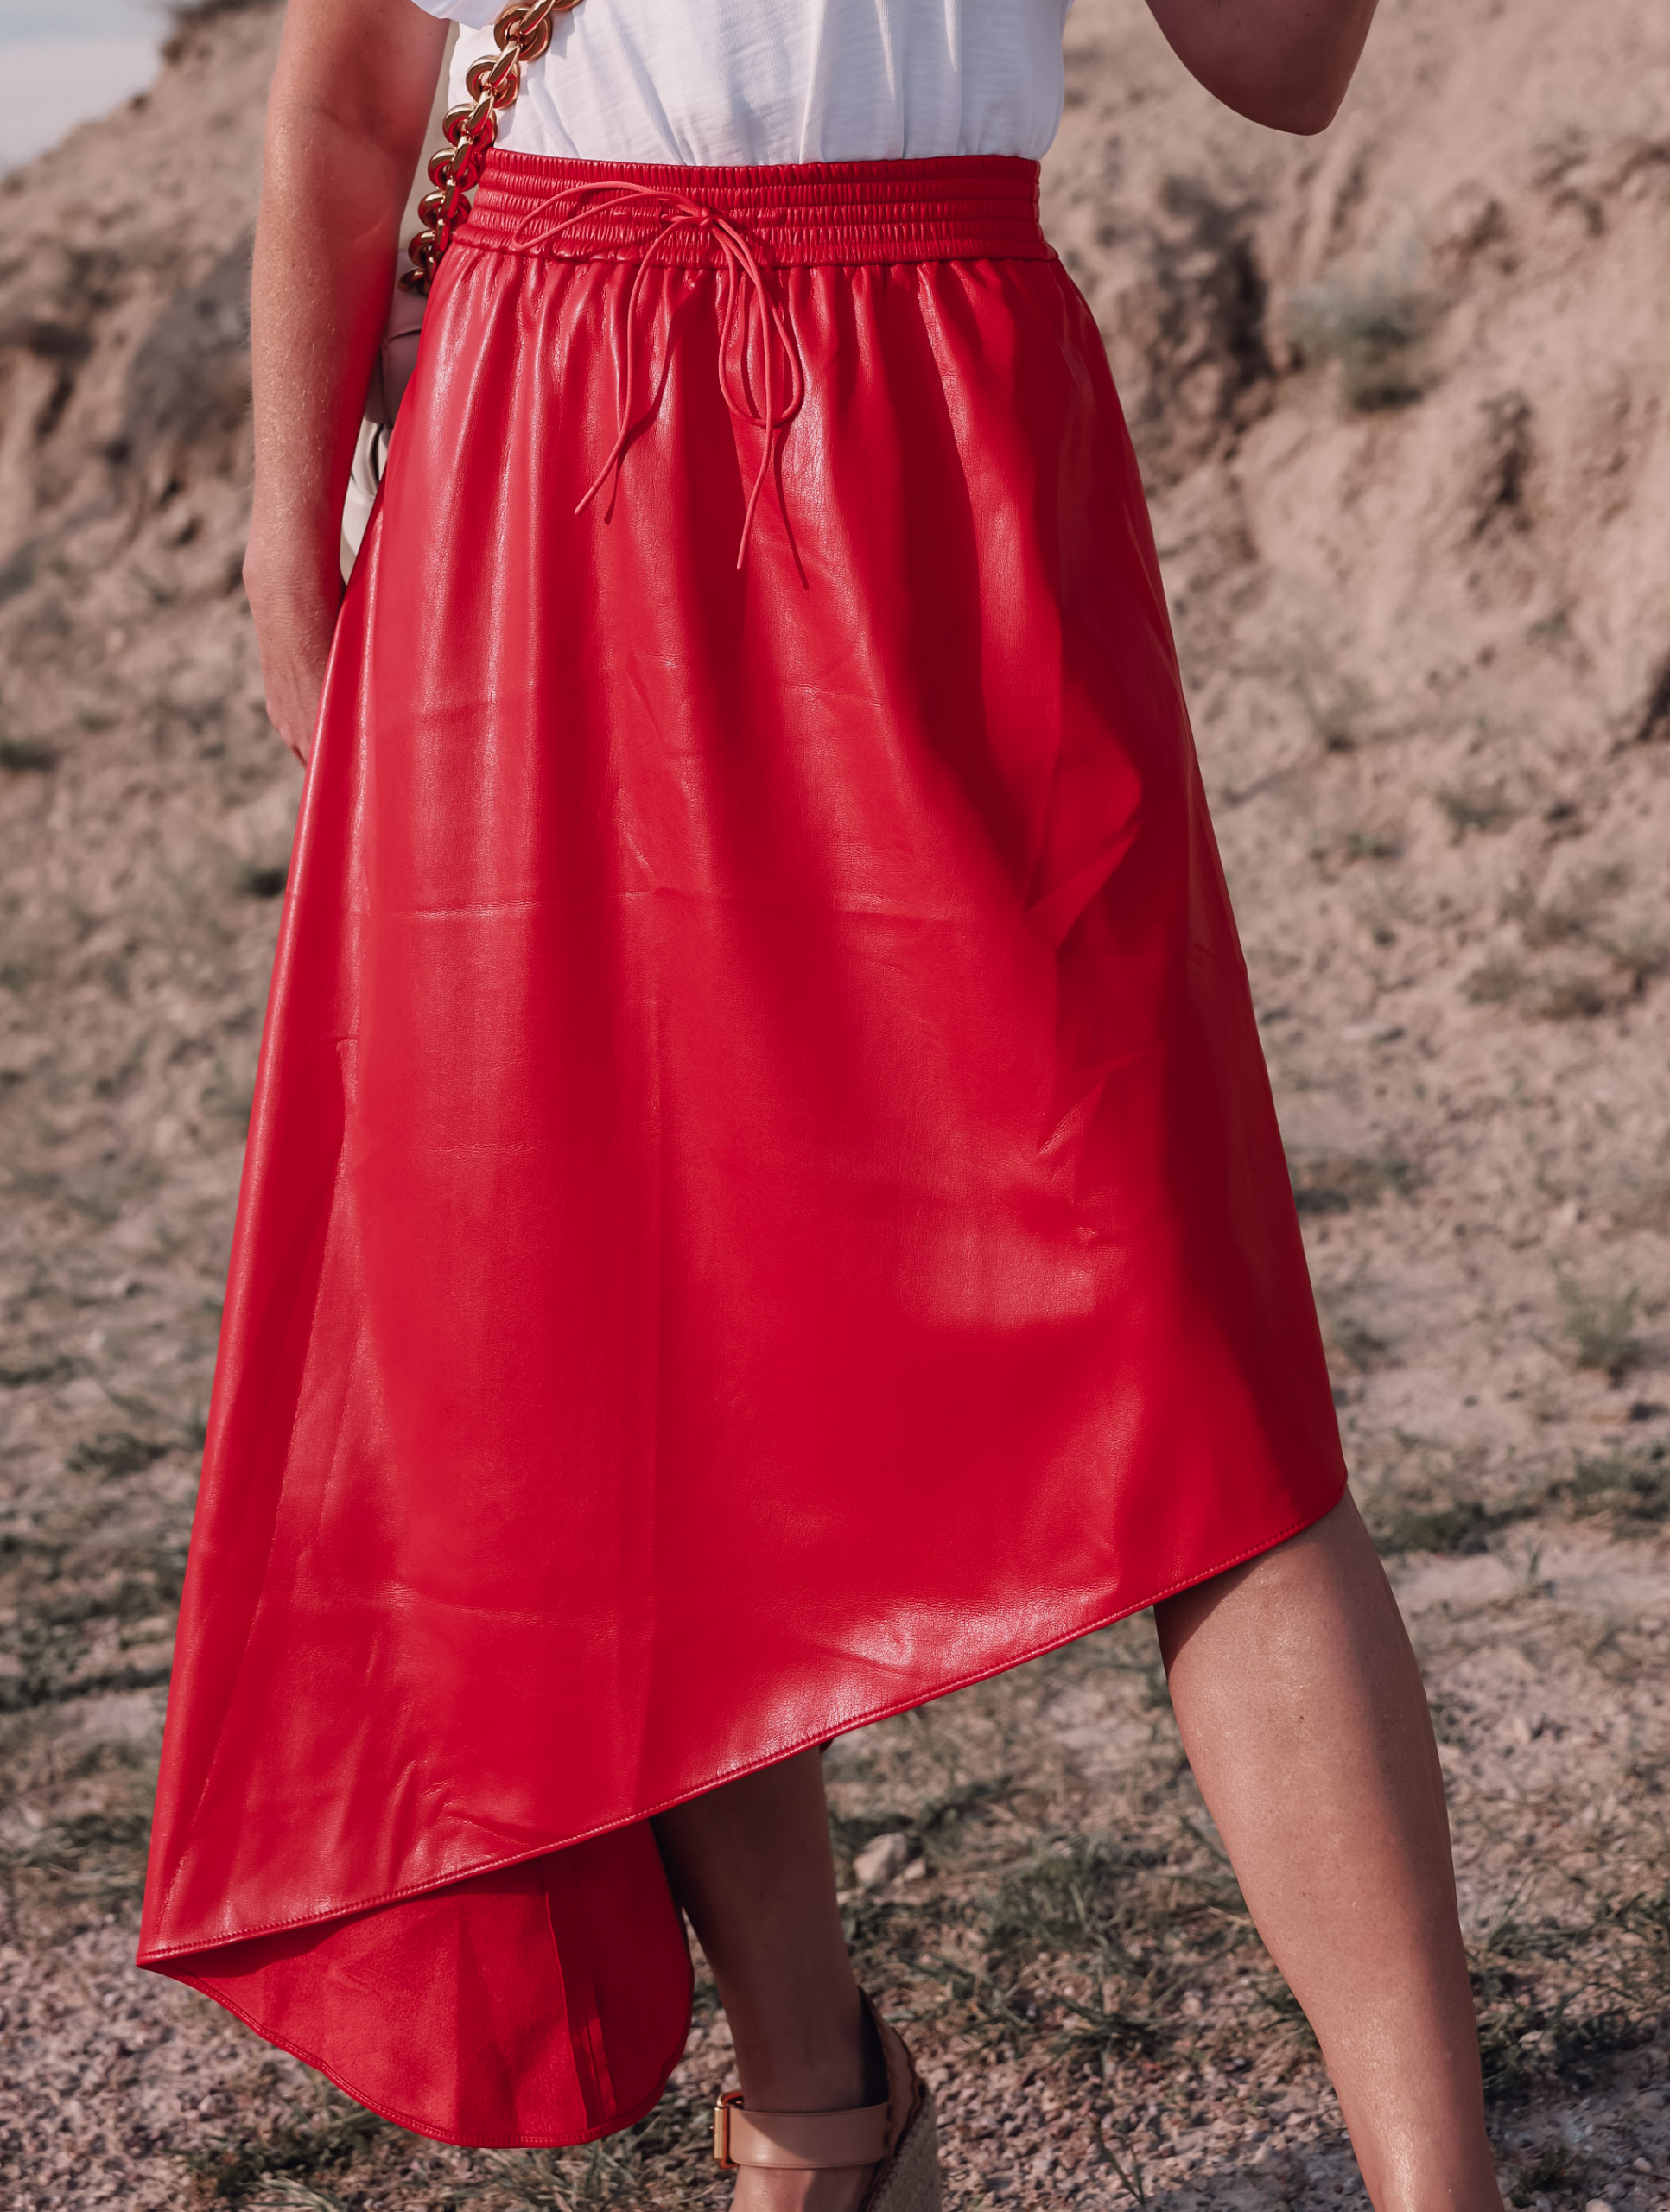 maxi skirts, maxi skirts over 40, printed pleatd maxi skirt, midi skirts over 40, how to wear midi skirts over 40, red alice + olivia midi asymmetrical skirt, erin busbee, how to wear maxi skirts, nation ltd ruffle sleeve tee, see by chloe wedges